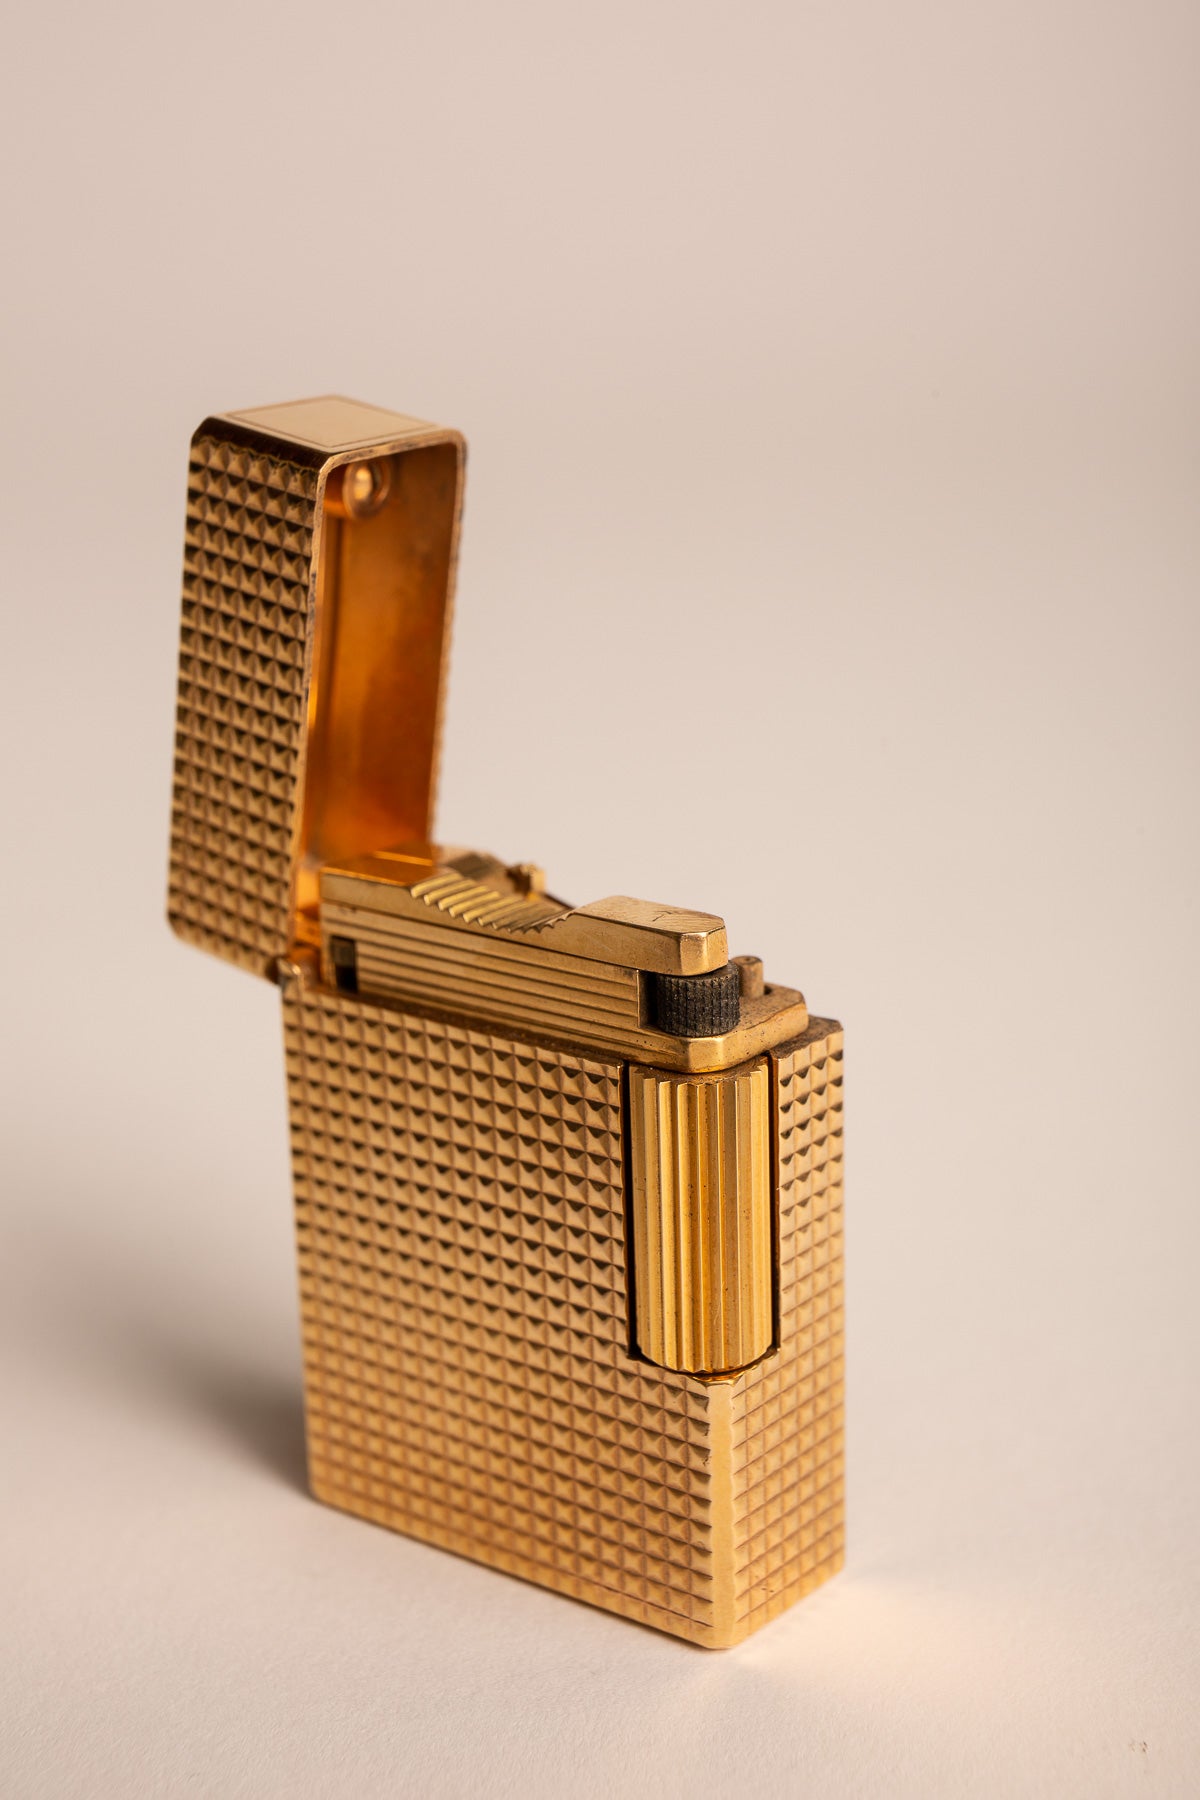 MAXFIELD PRIVATE COLLECTION | VINTAGE DUPONT STUD LIGHTER